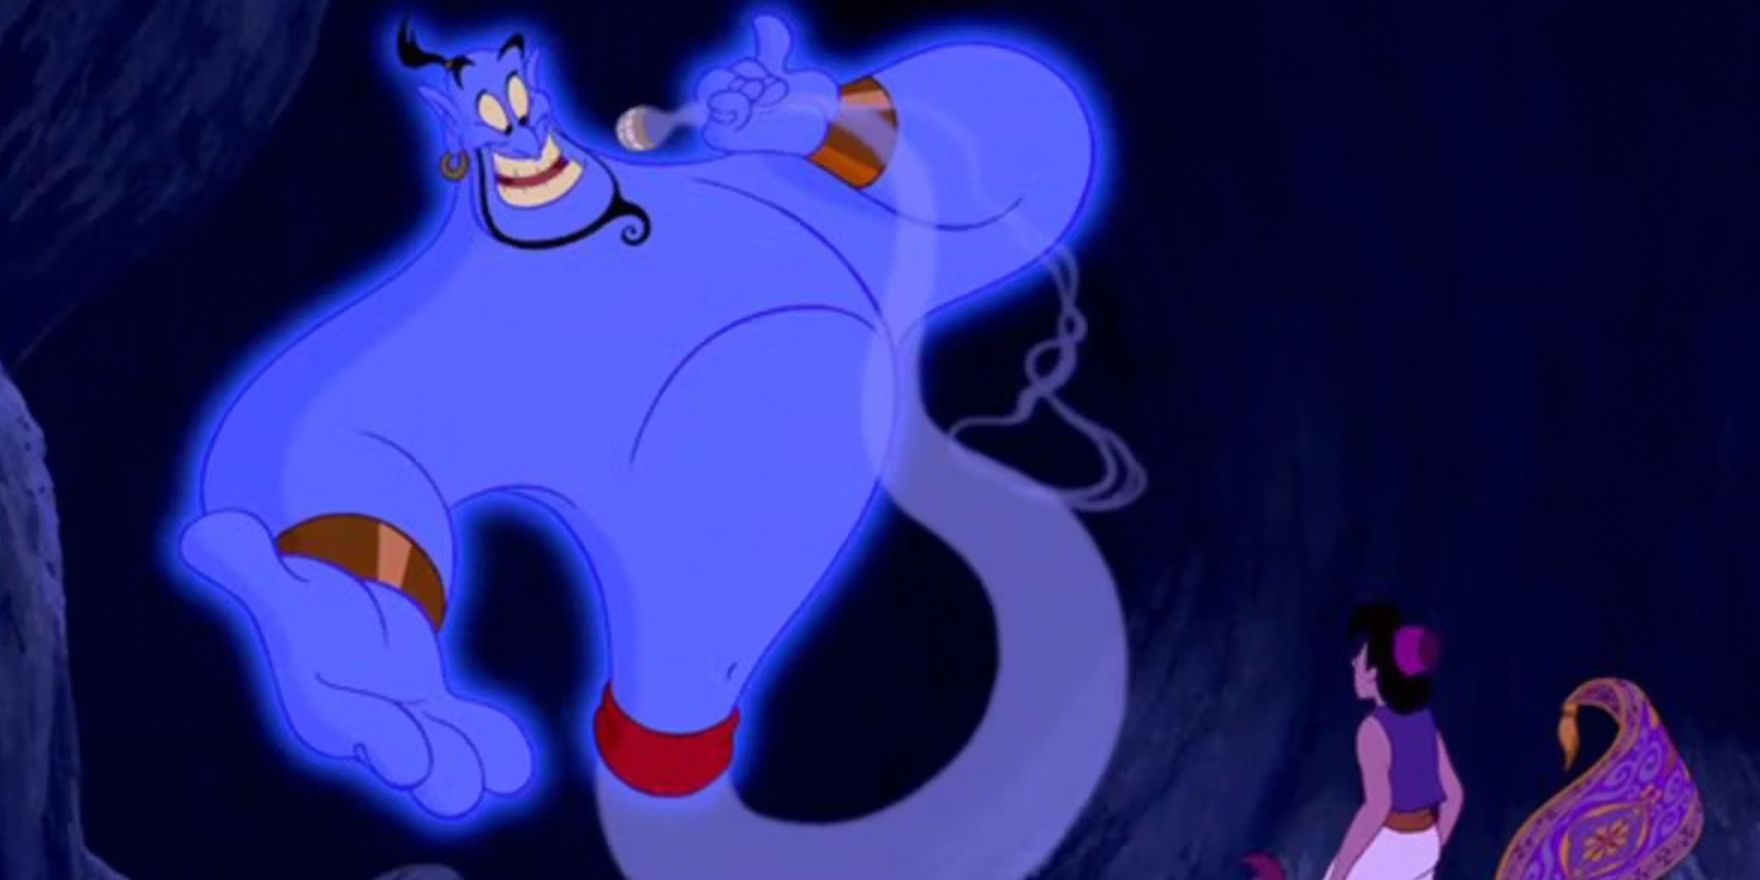 Genie transforming part of himself into a microphone to talk to Aladdin in the animated movie